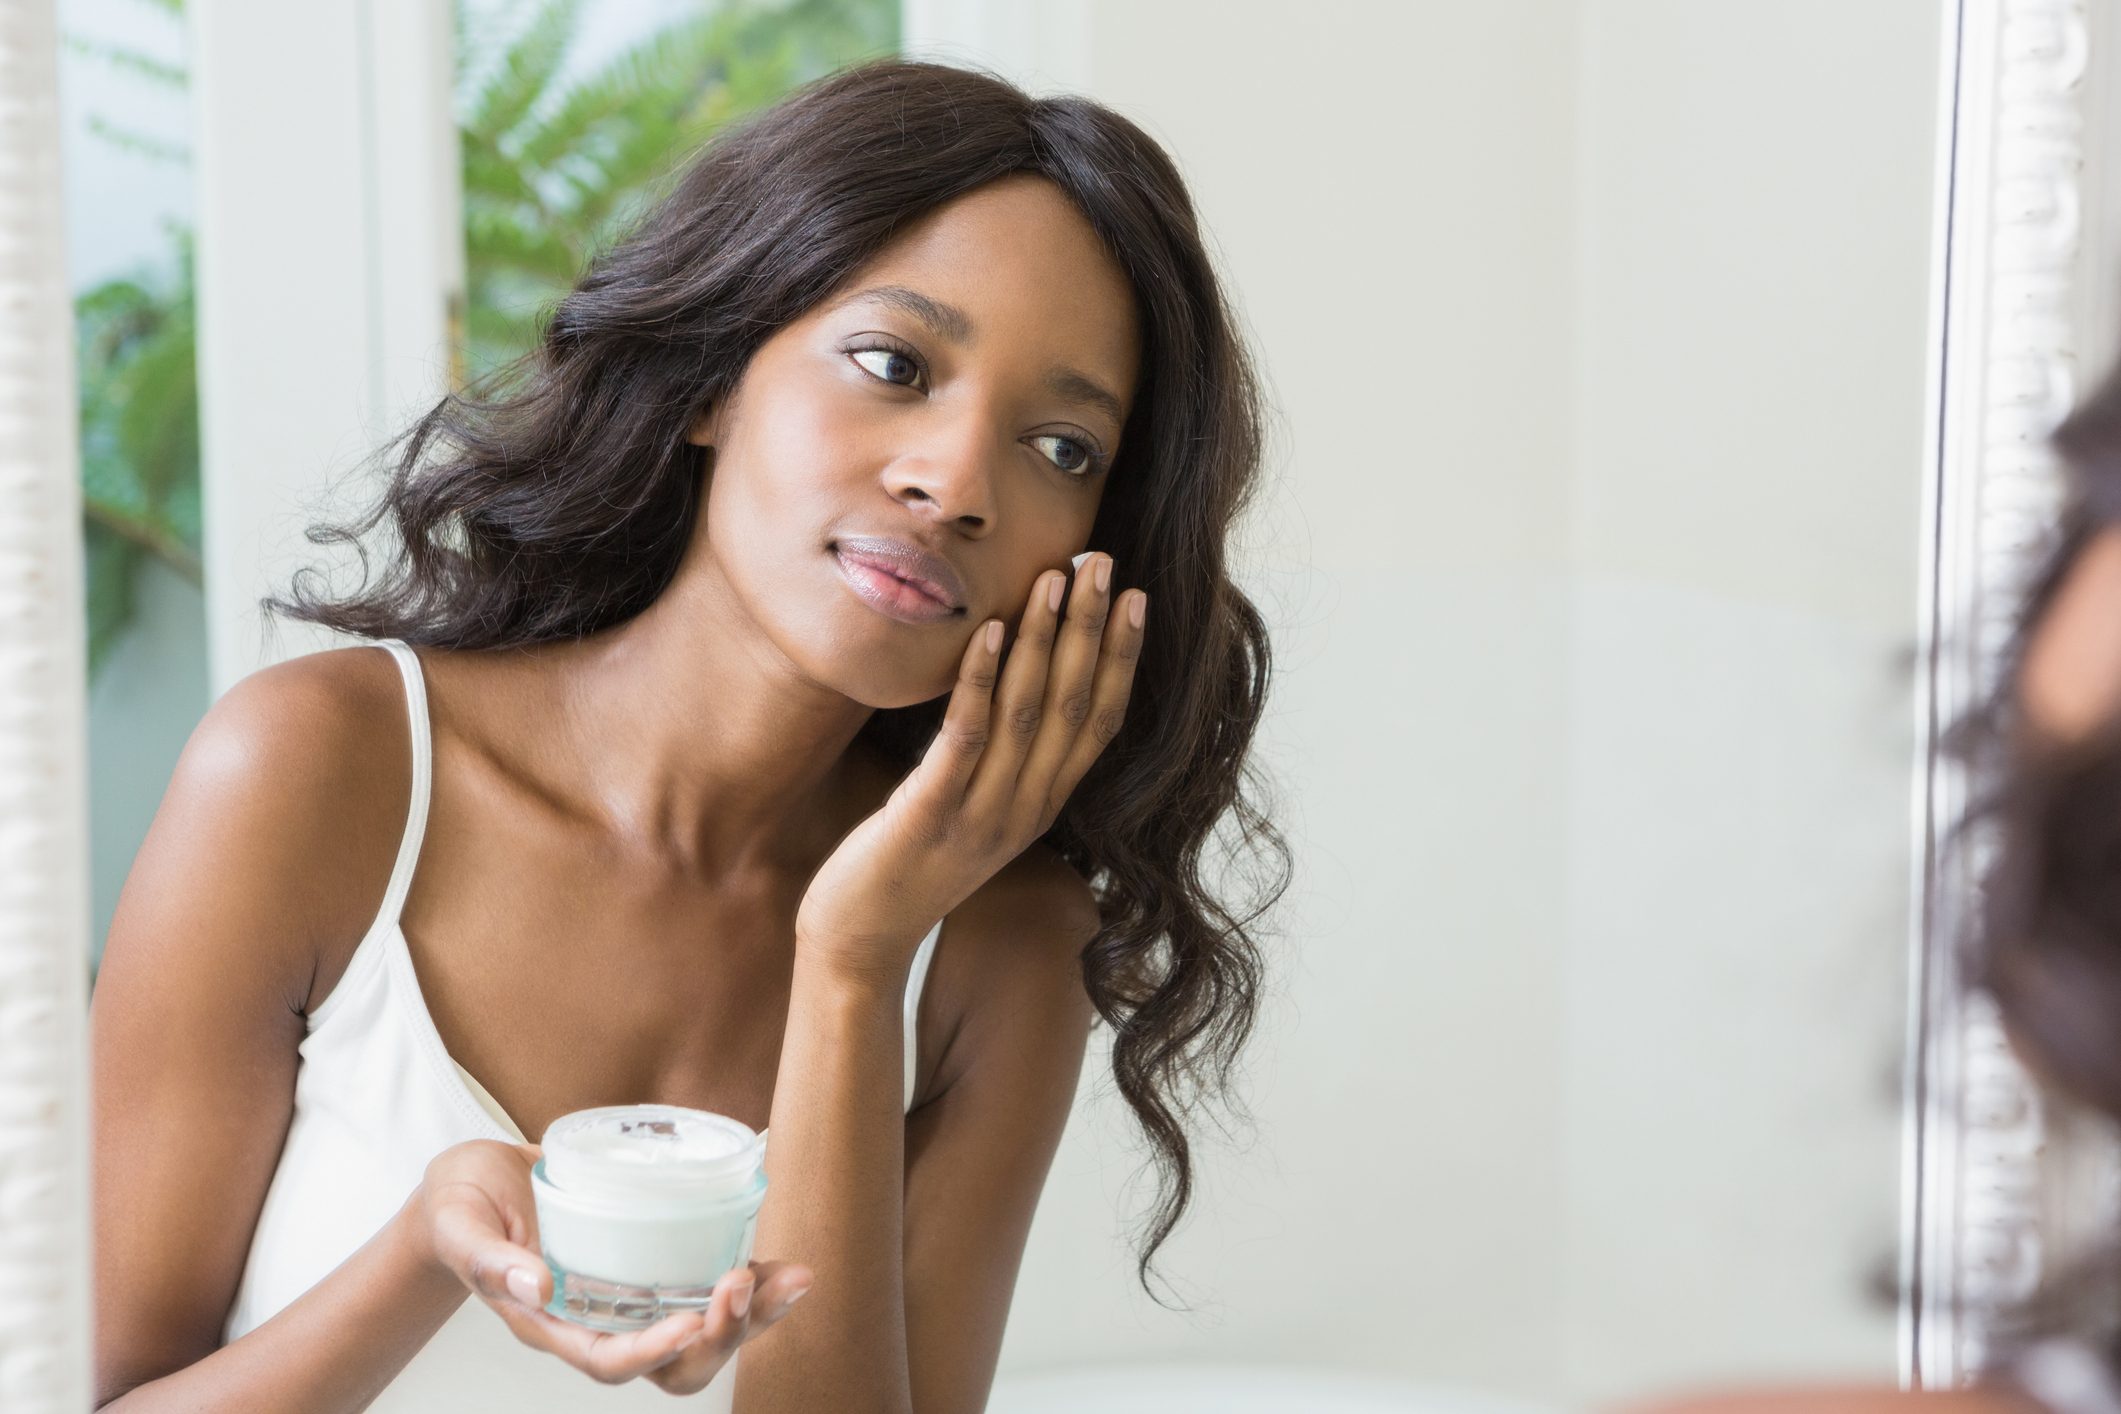 7 Simple Steps to Take Tomorrow Morning for Your Best Skin Ever